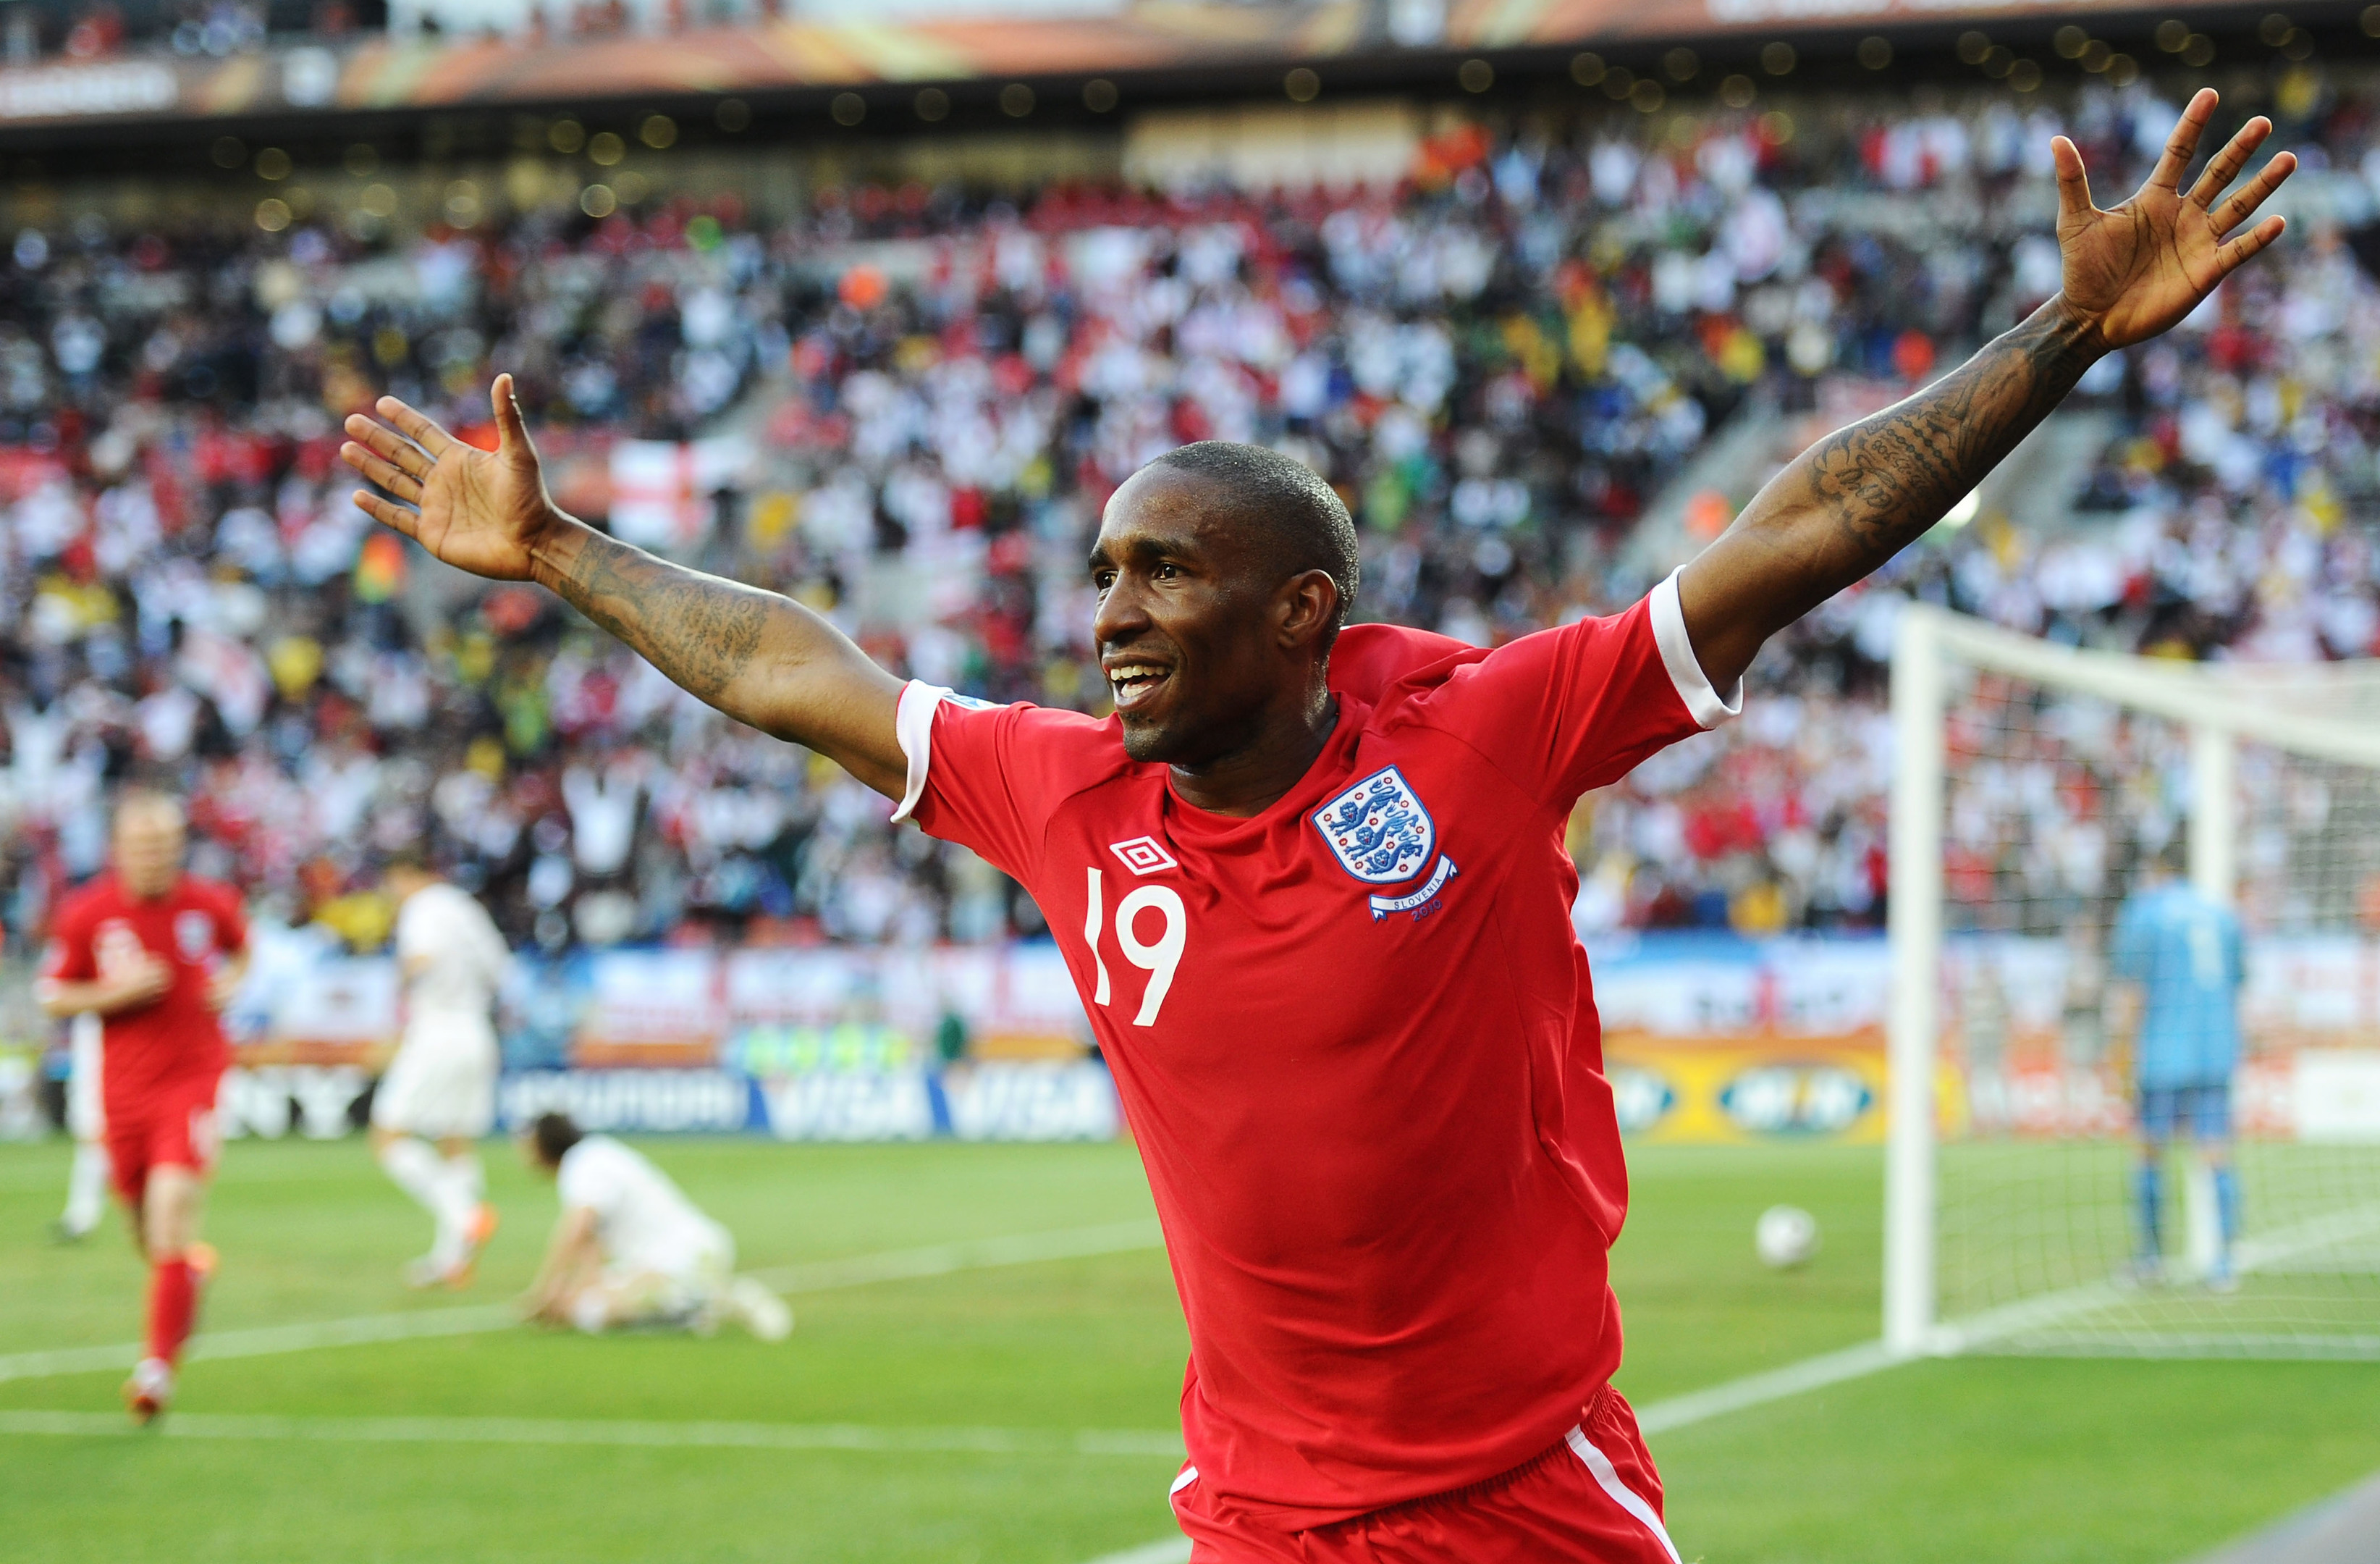 Jermain Defoe scored for England at the 2010 World Cup (Laurence Griffiths/Getty Images)